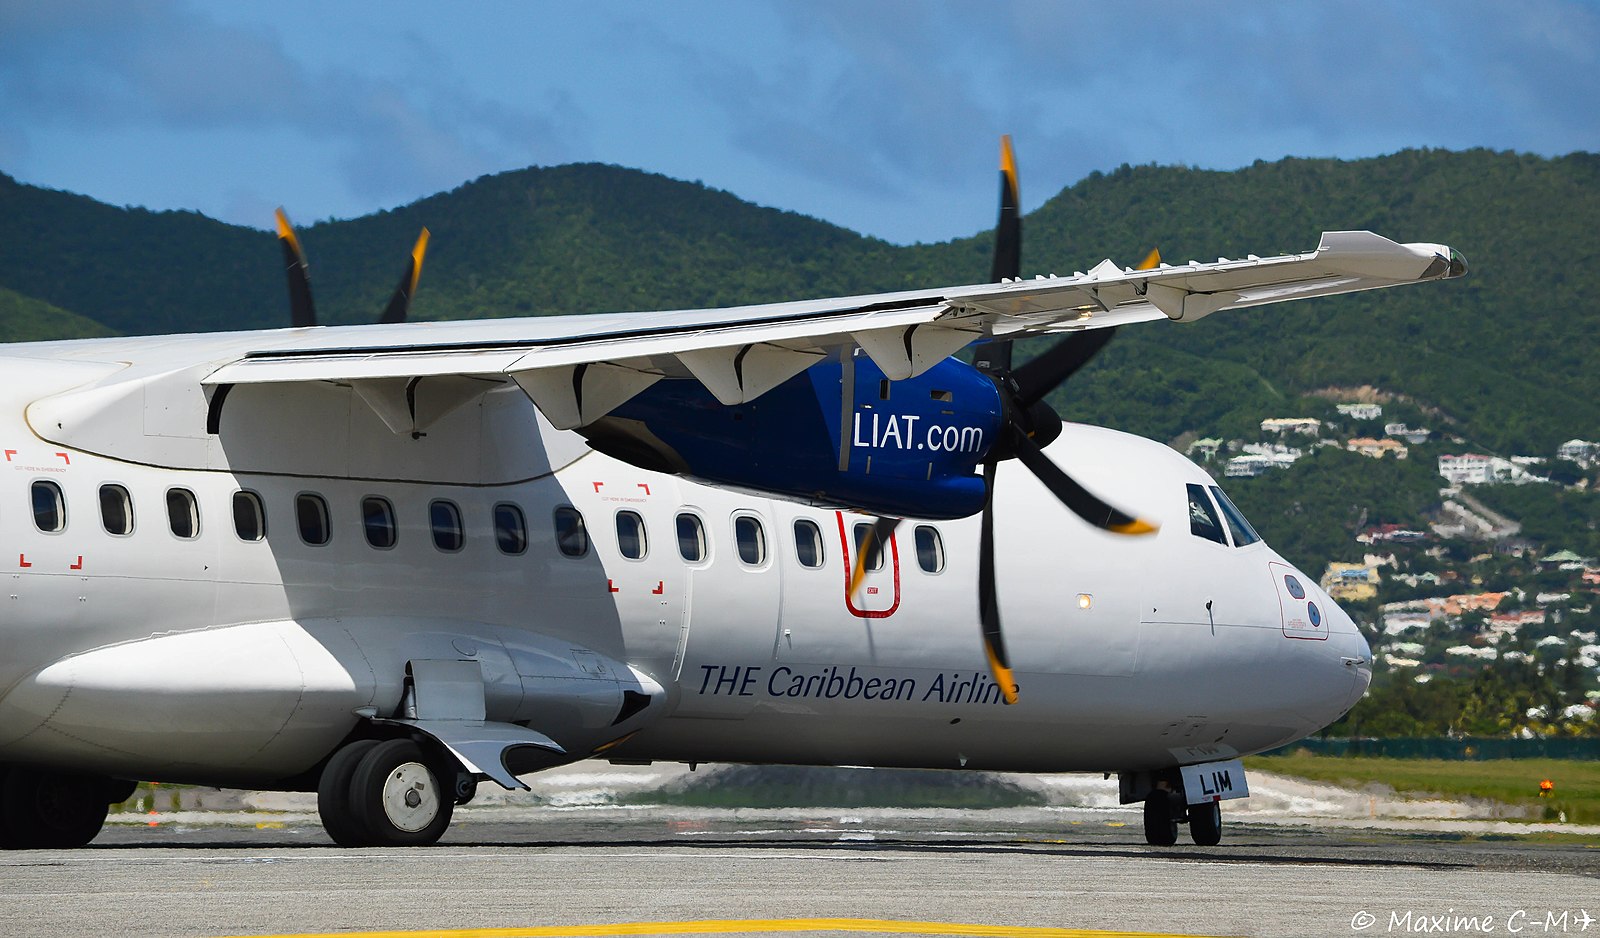 LIAT suspends services due to volcanic activity